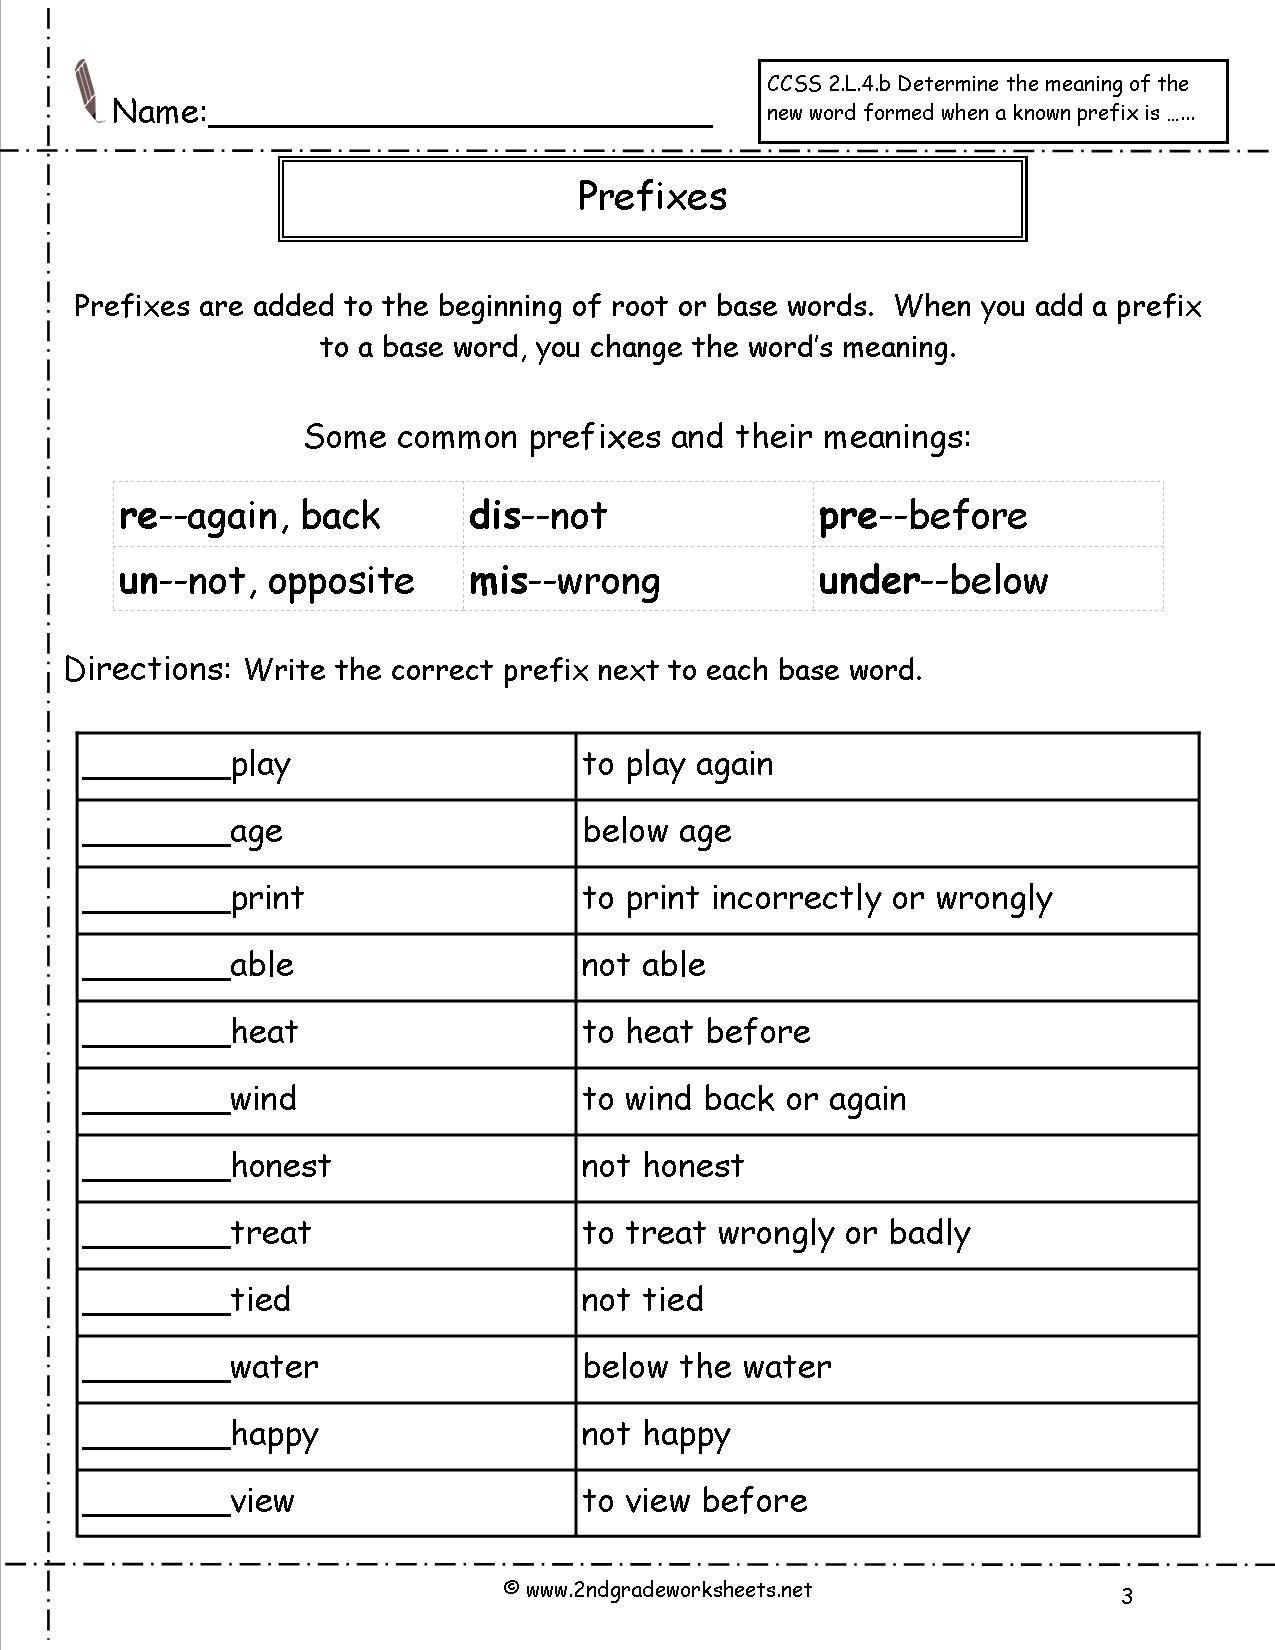 Suffixes Worksheets for 2nd Grade Pin On Prefixes